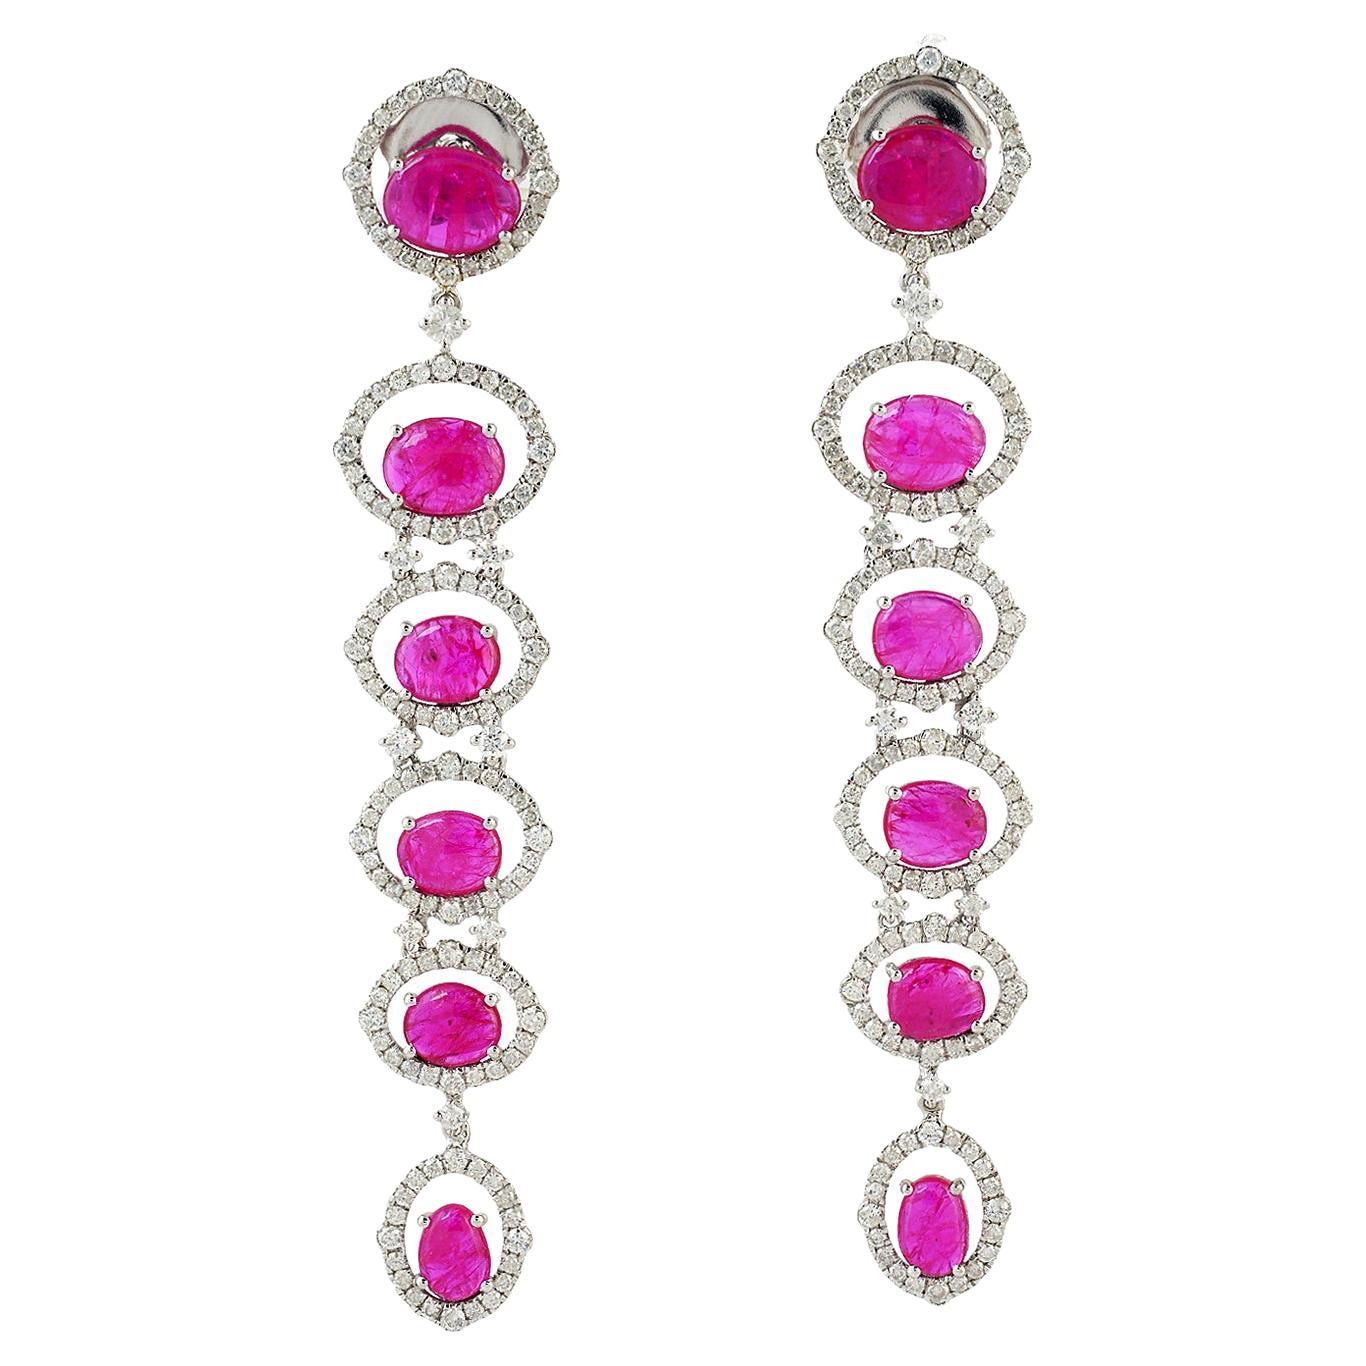 Multi Tier Ruby Dangle Earrings With Diamonds Made In 18k White Gold For Sale